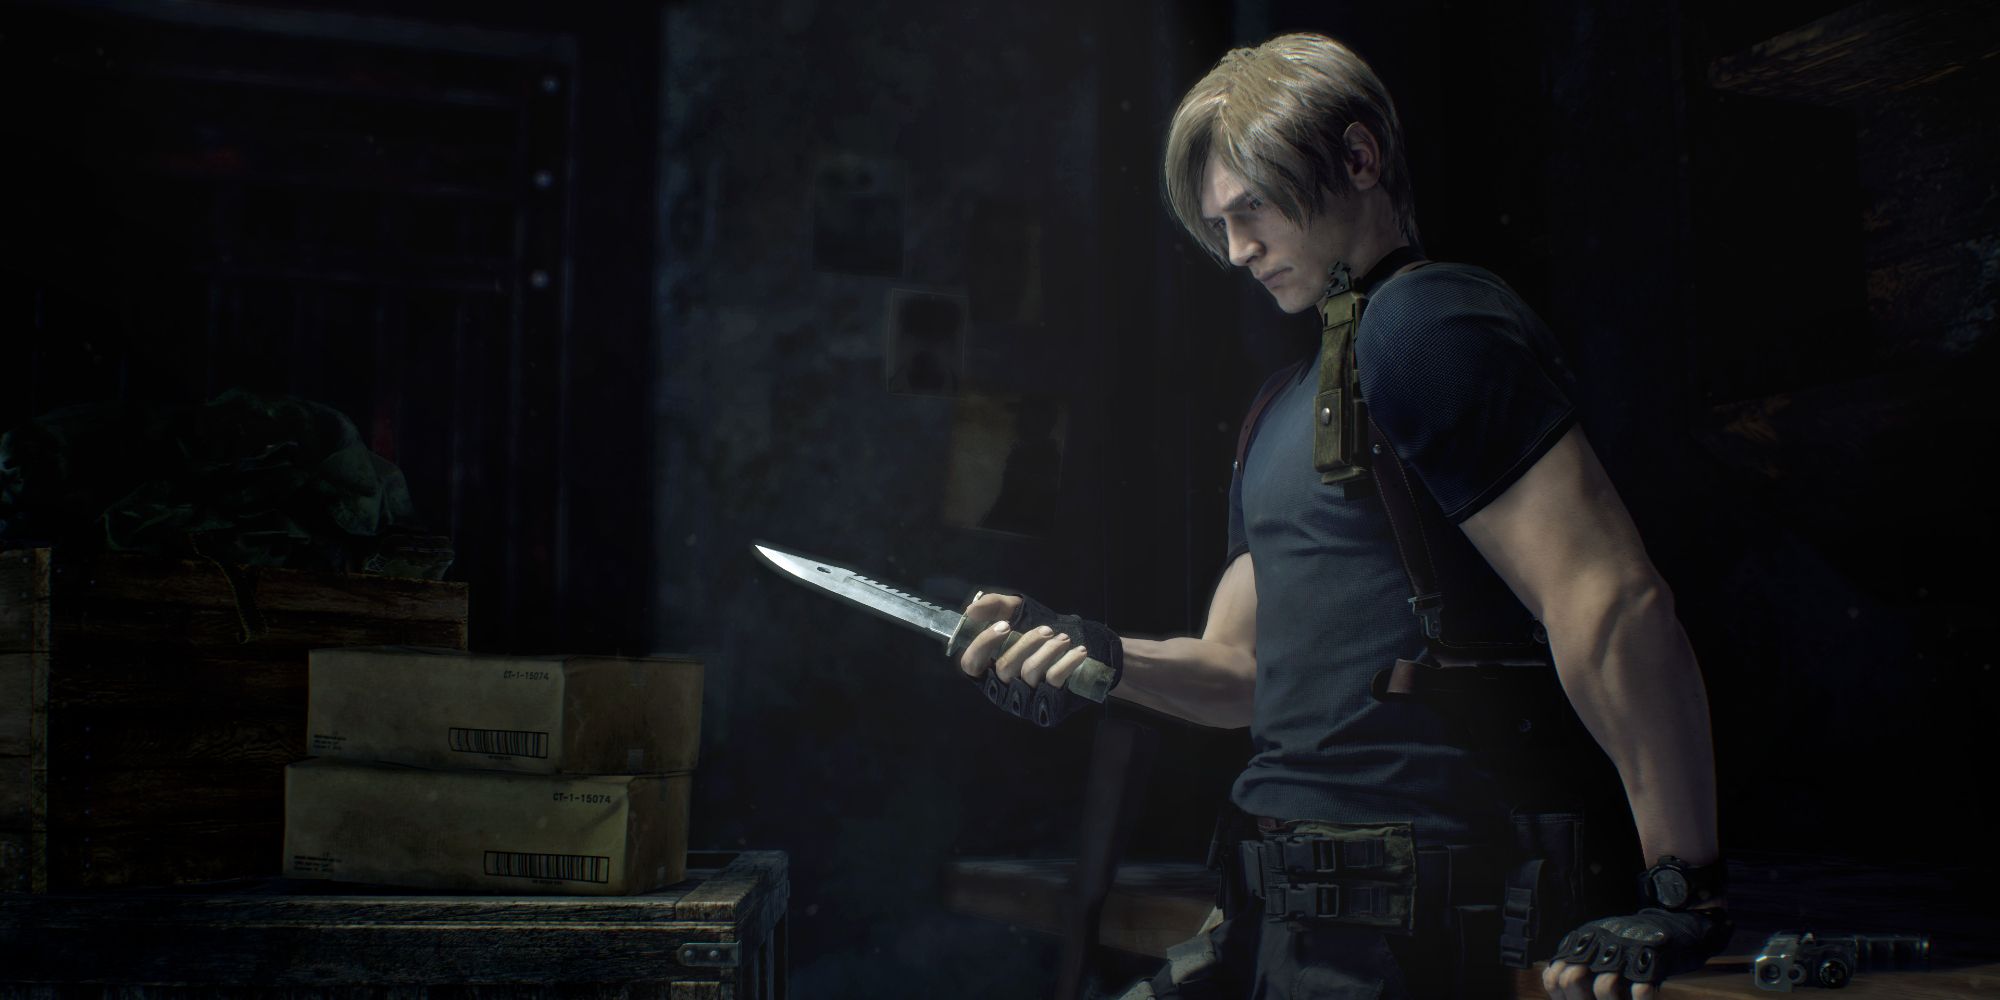 Resident Evil 4 veterans are telling fans to “shoot the water to